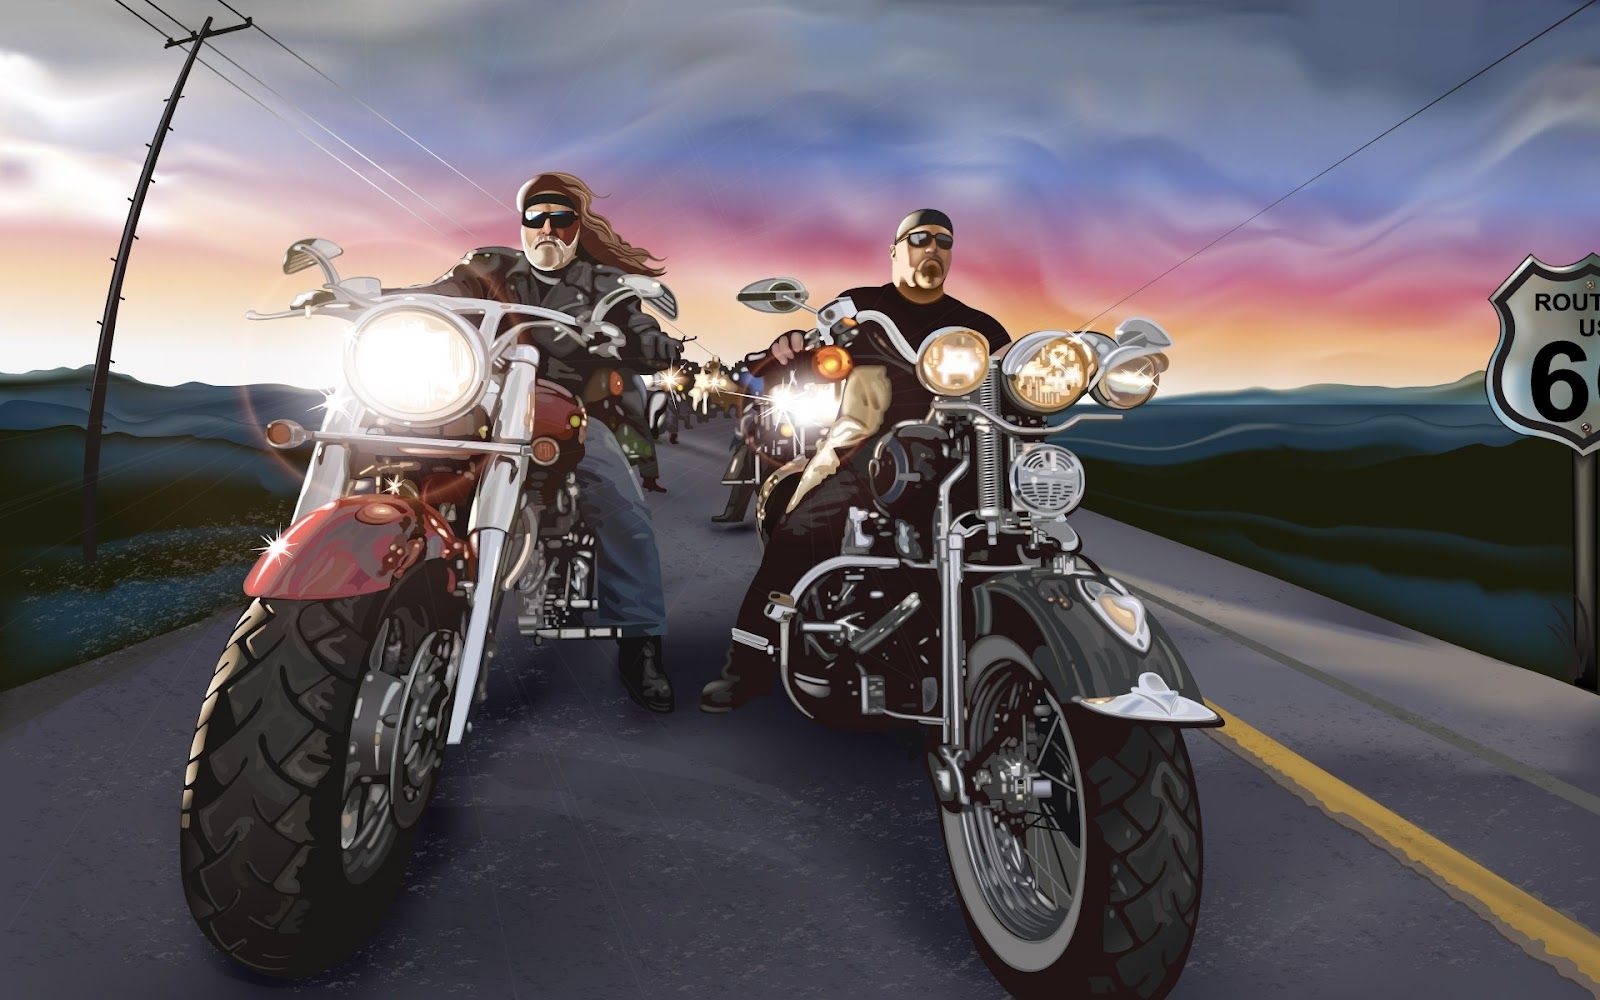 Biker Lifestyle: Embracing the Freedom of the Open Road